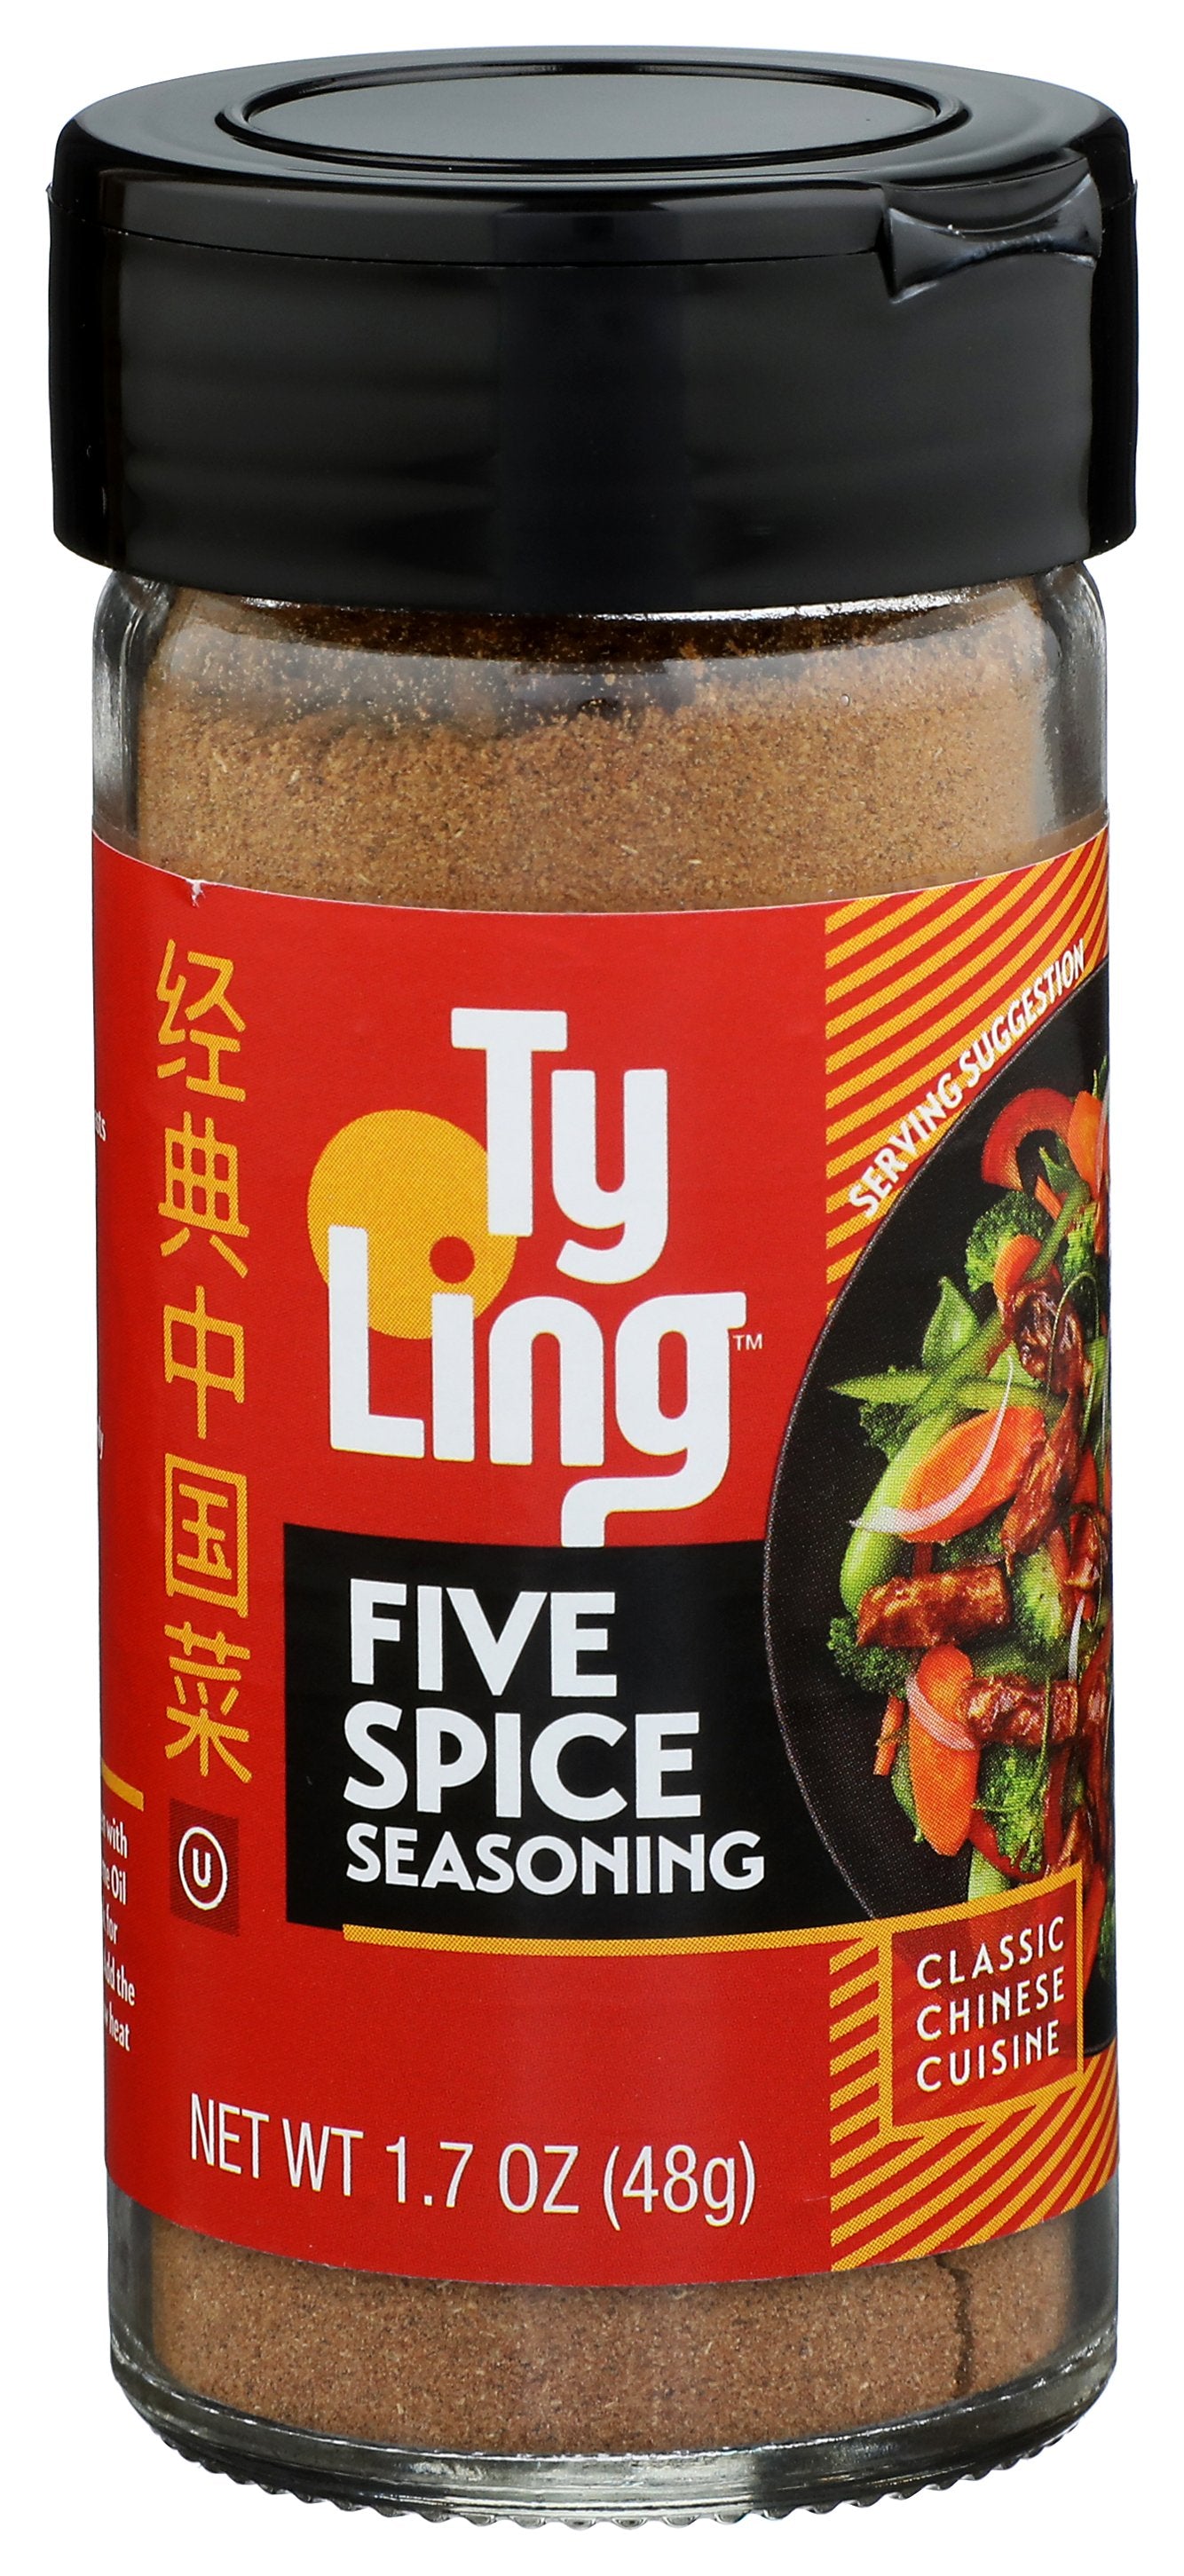 TY LING SSNNG FIVE SPICE - Case of 6